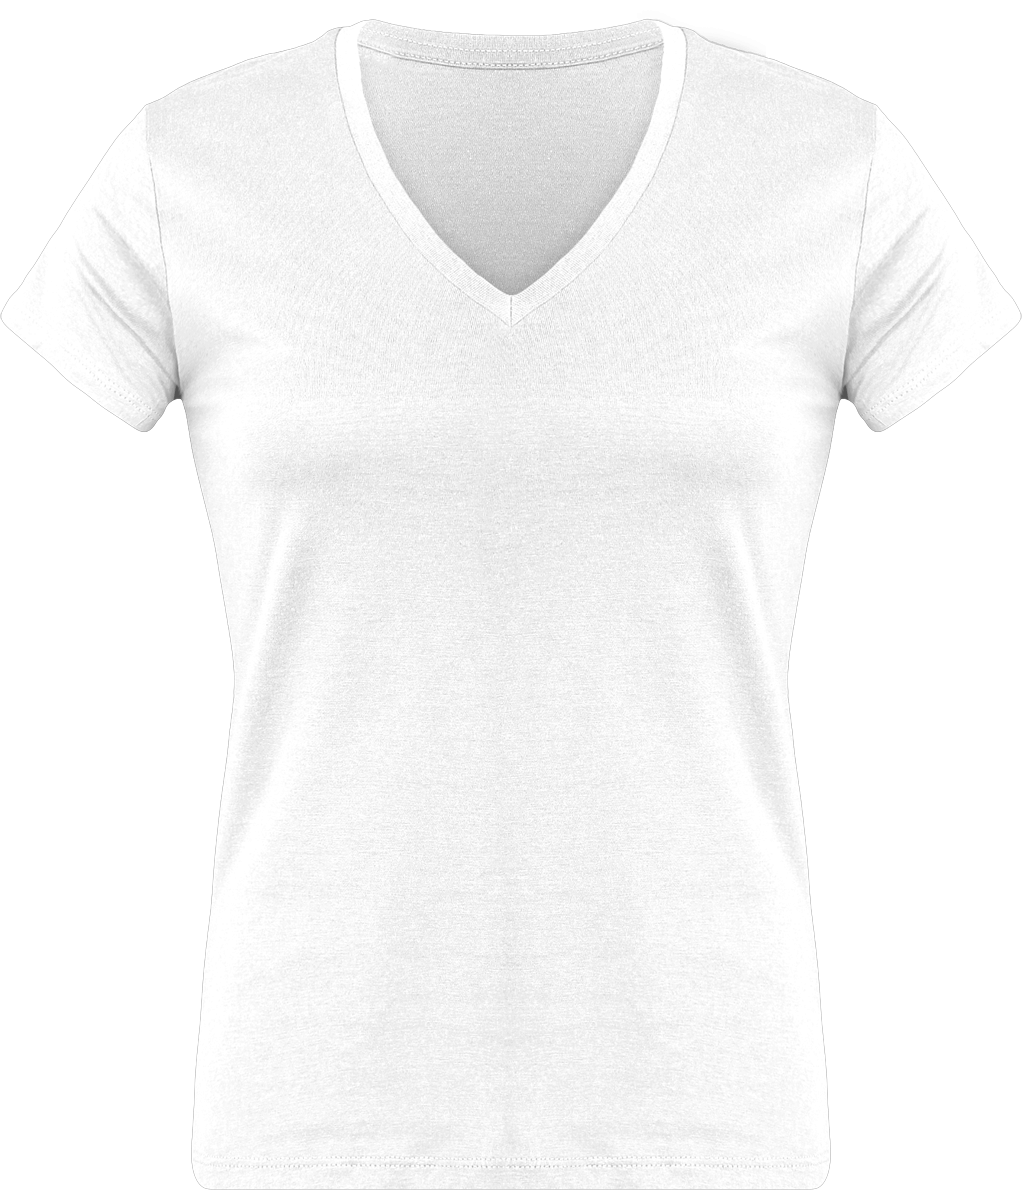 Customizable Women's T-Shirt, Feminine And Comfortable With Its V-Neck White